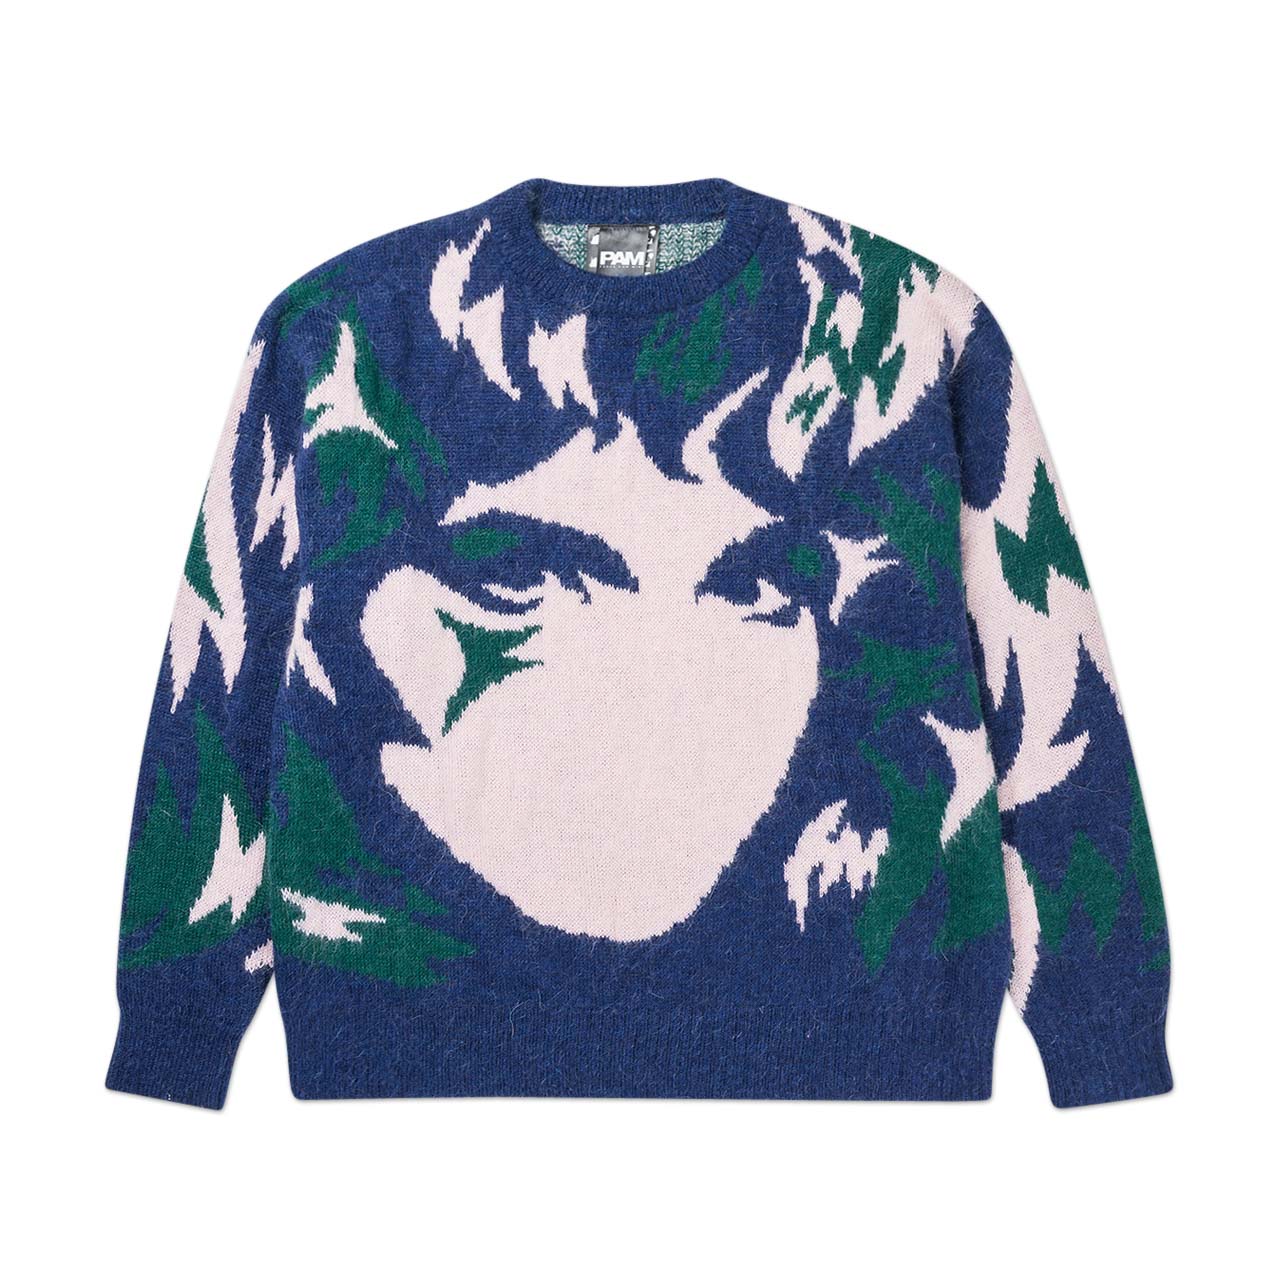 perks and mini handmaiden camo sweater (navy) - 8572-n - a.plus - Image - 1